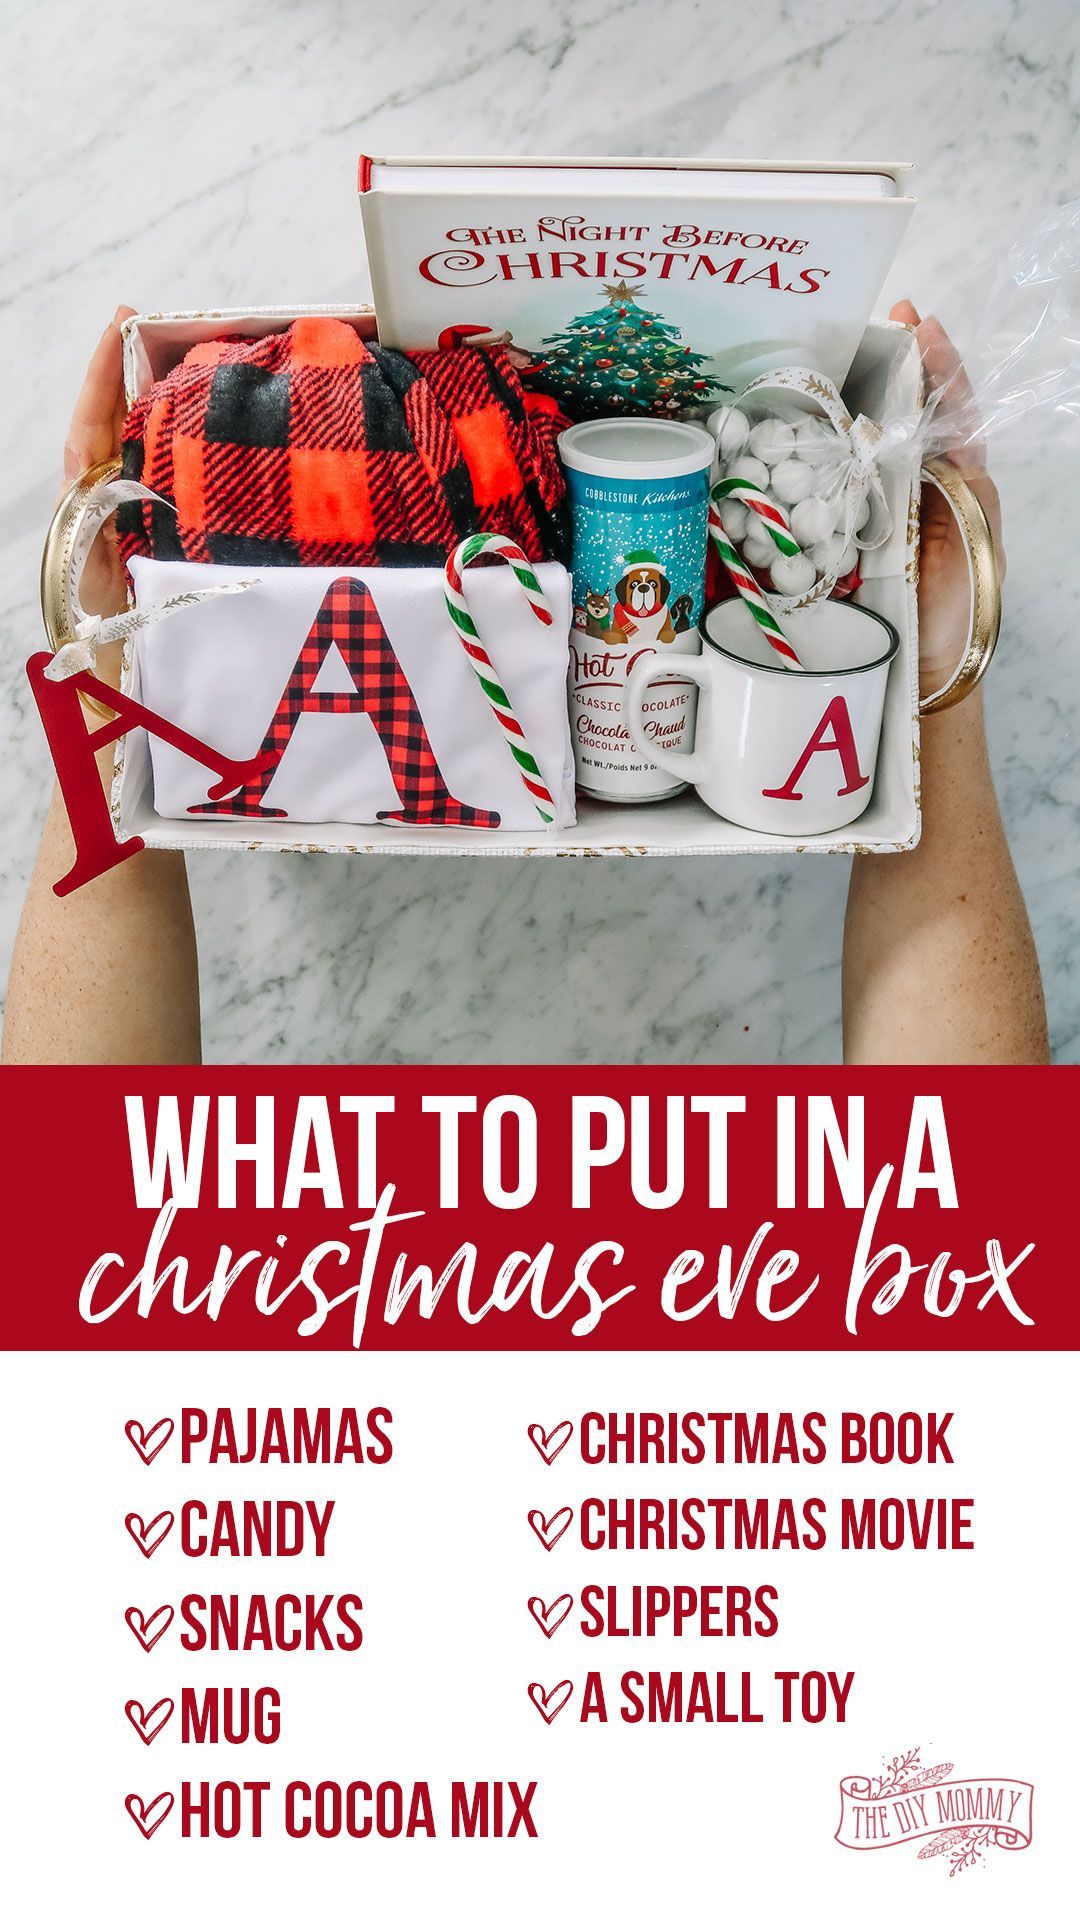 Make a Personalized Christmas Eve Box | The DIY Mommy - Make a Personalized Christmas Eve Box | The DIY Mommy -   18 diy Box christmas ideas